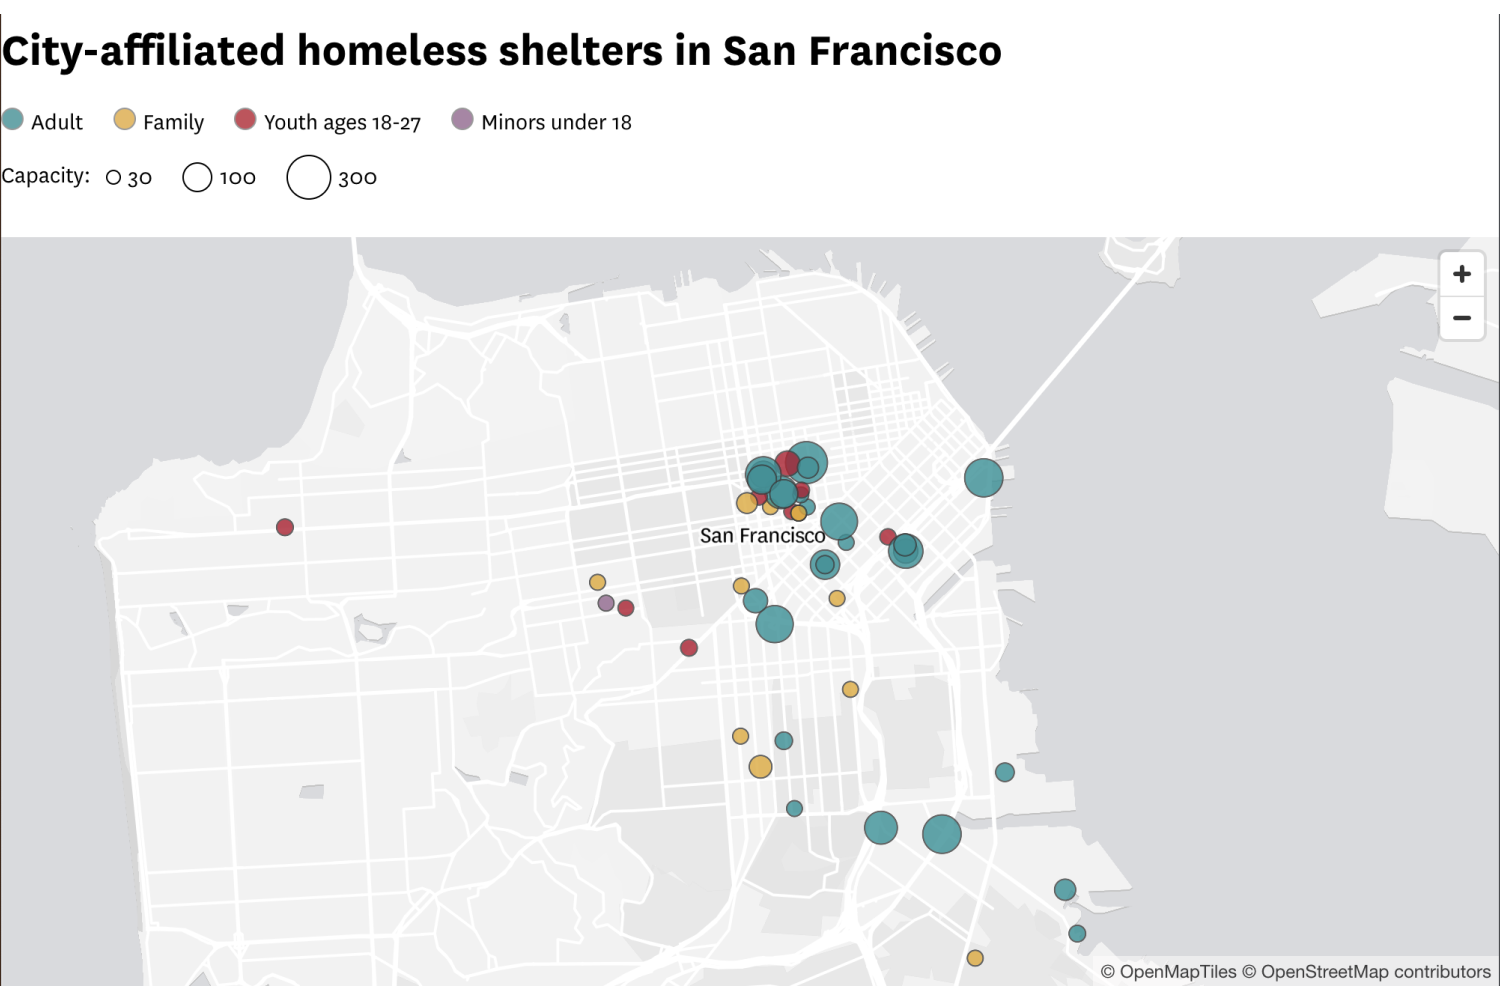 This map shows where San Francisco’s homeless shelters are located